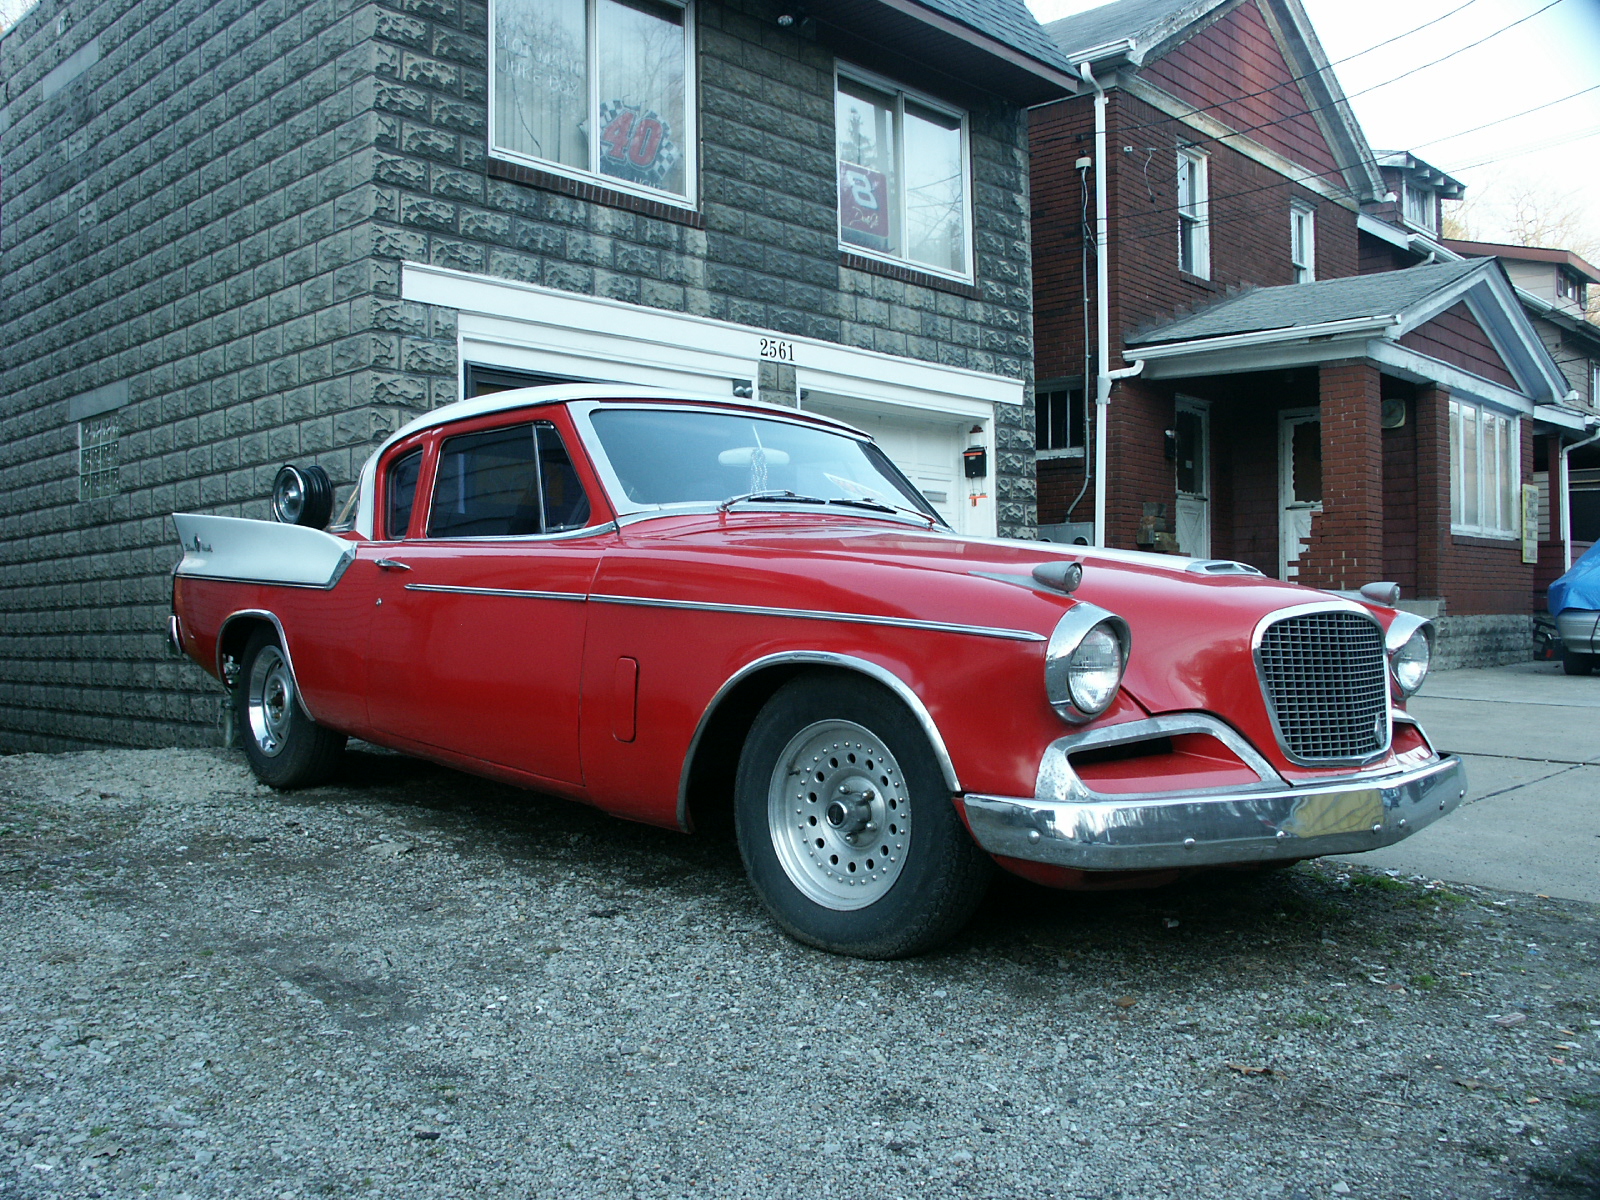 Pittsburgh PA - Overbrook 1959 Studebaker Silver Hawk | Flickr ...